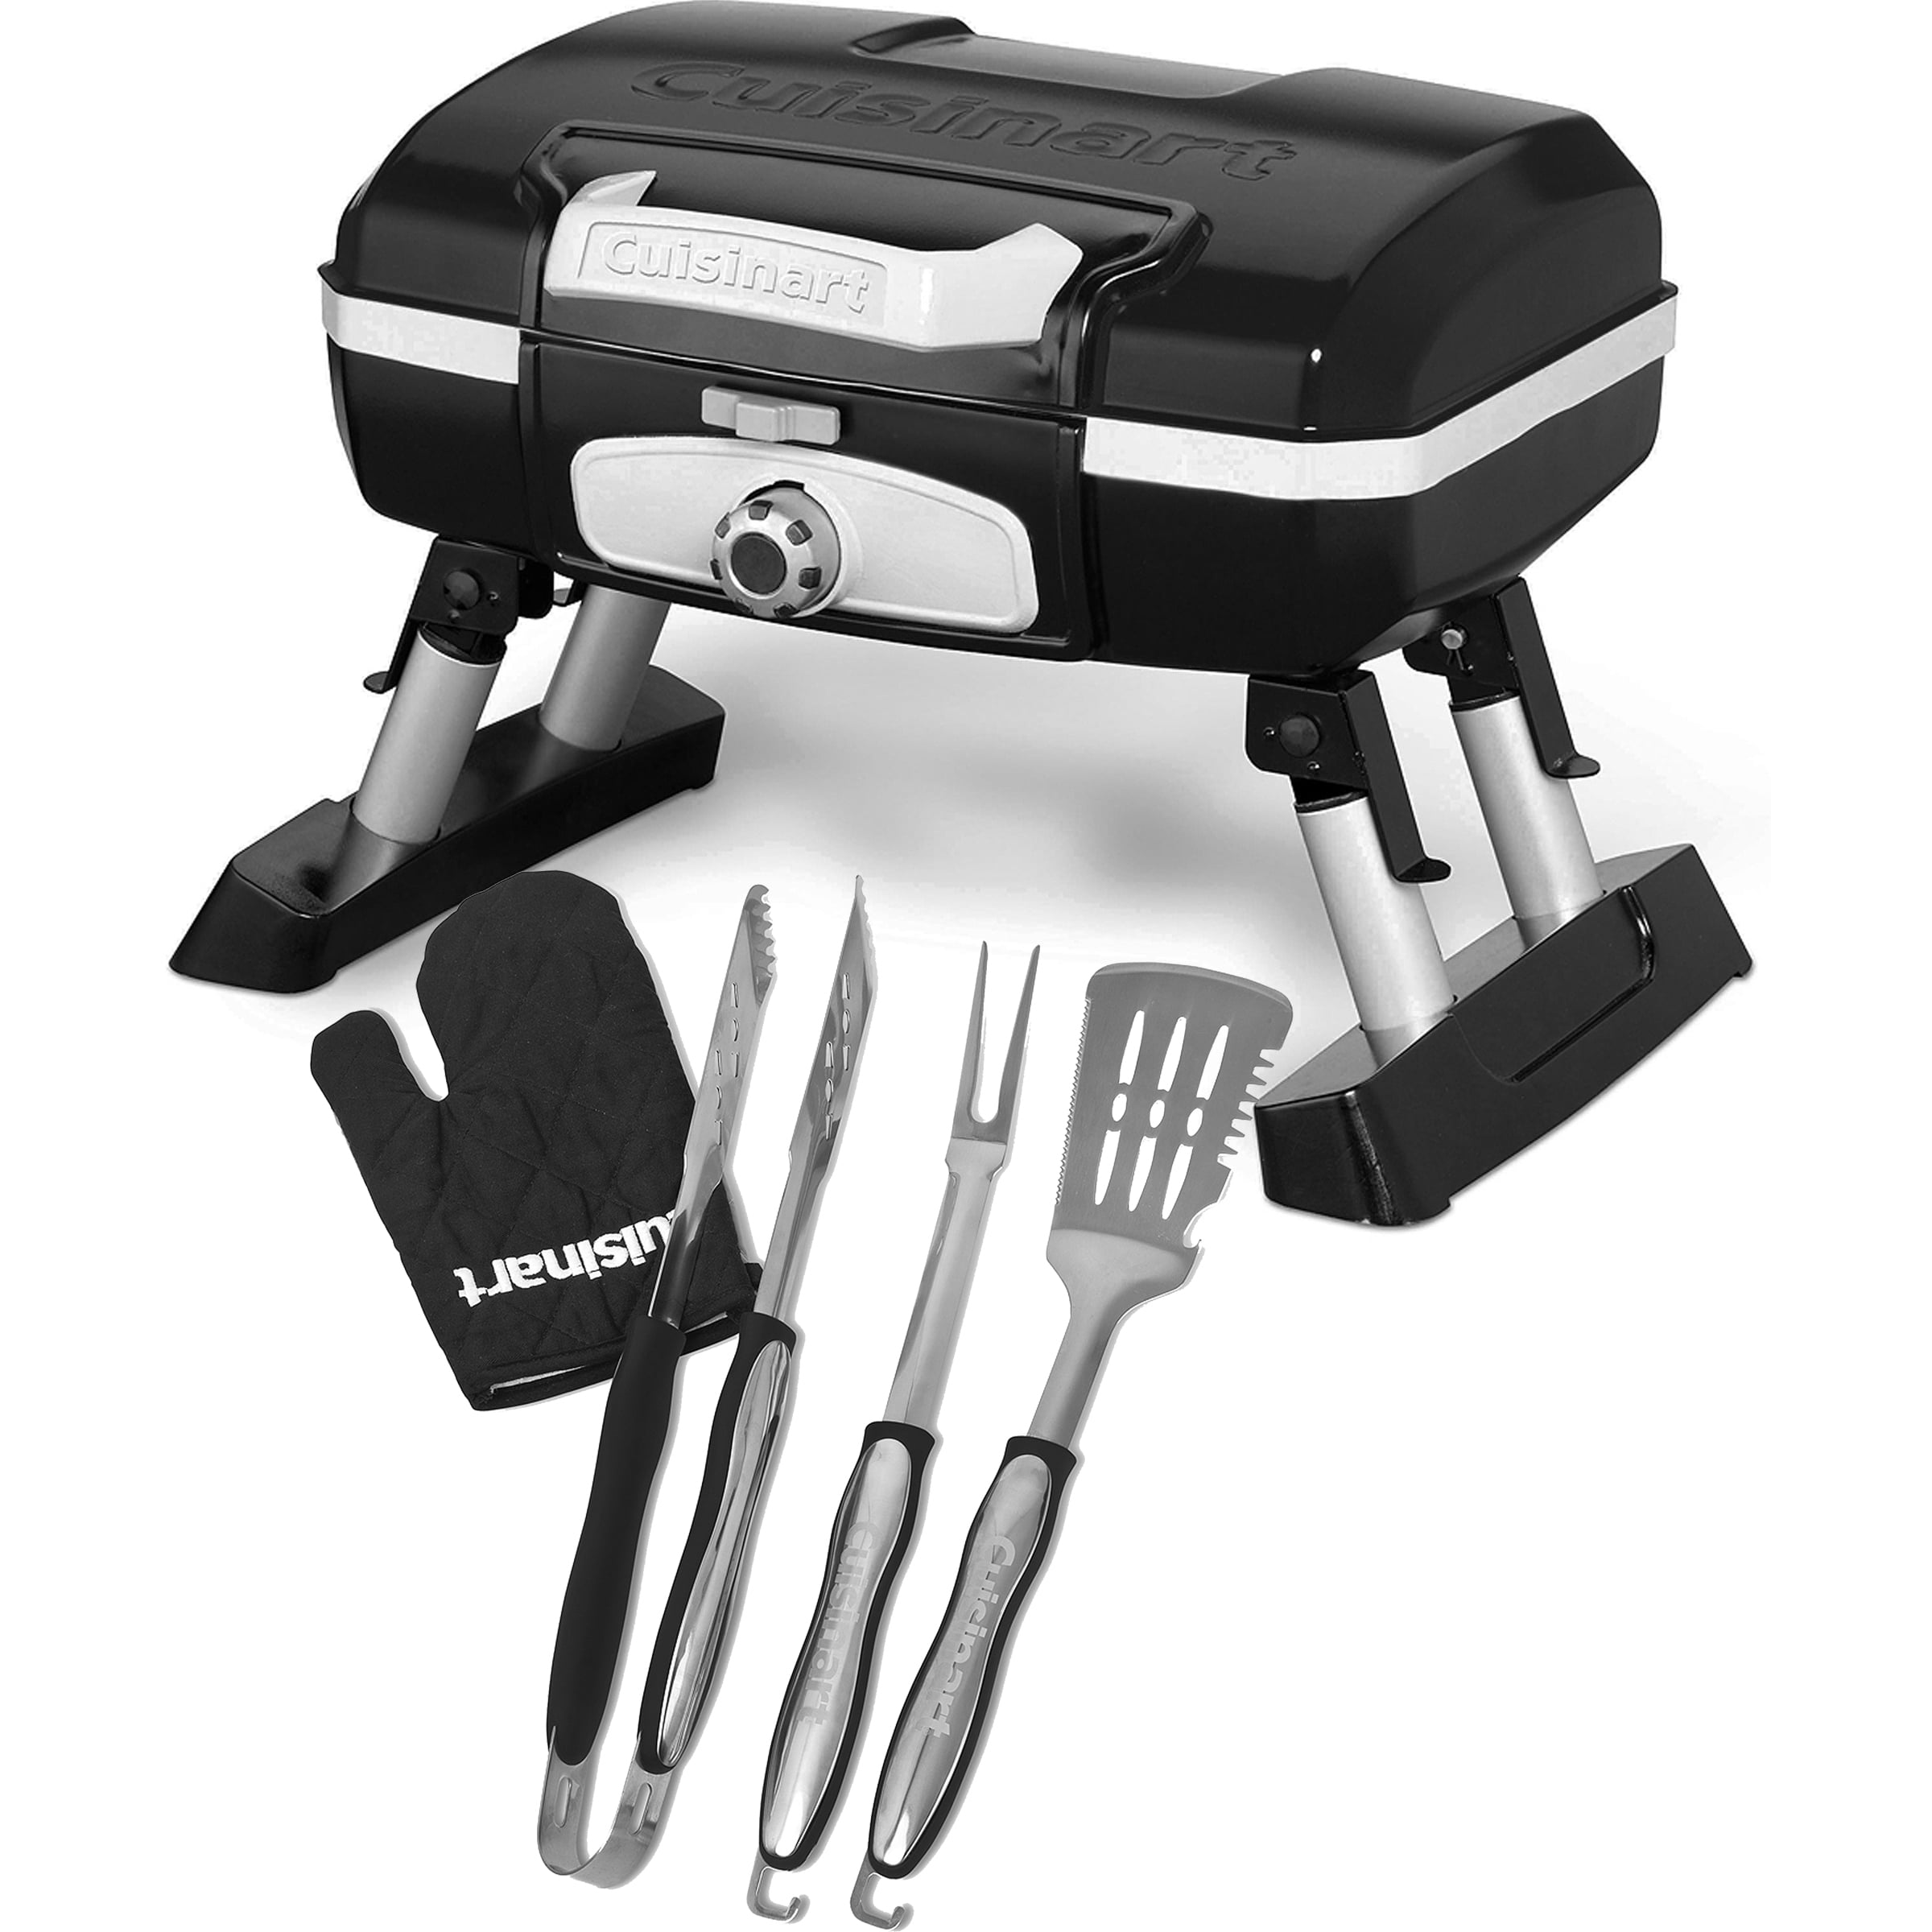 Cuisinart CGG-180TB Petit Gourmet Tabletop Gas Grill with 3 Piece Tool Set and BONUS Grill Glove